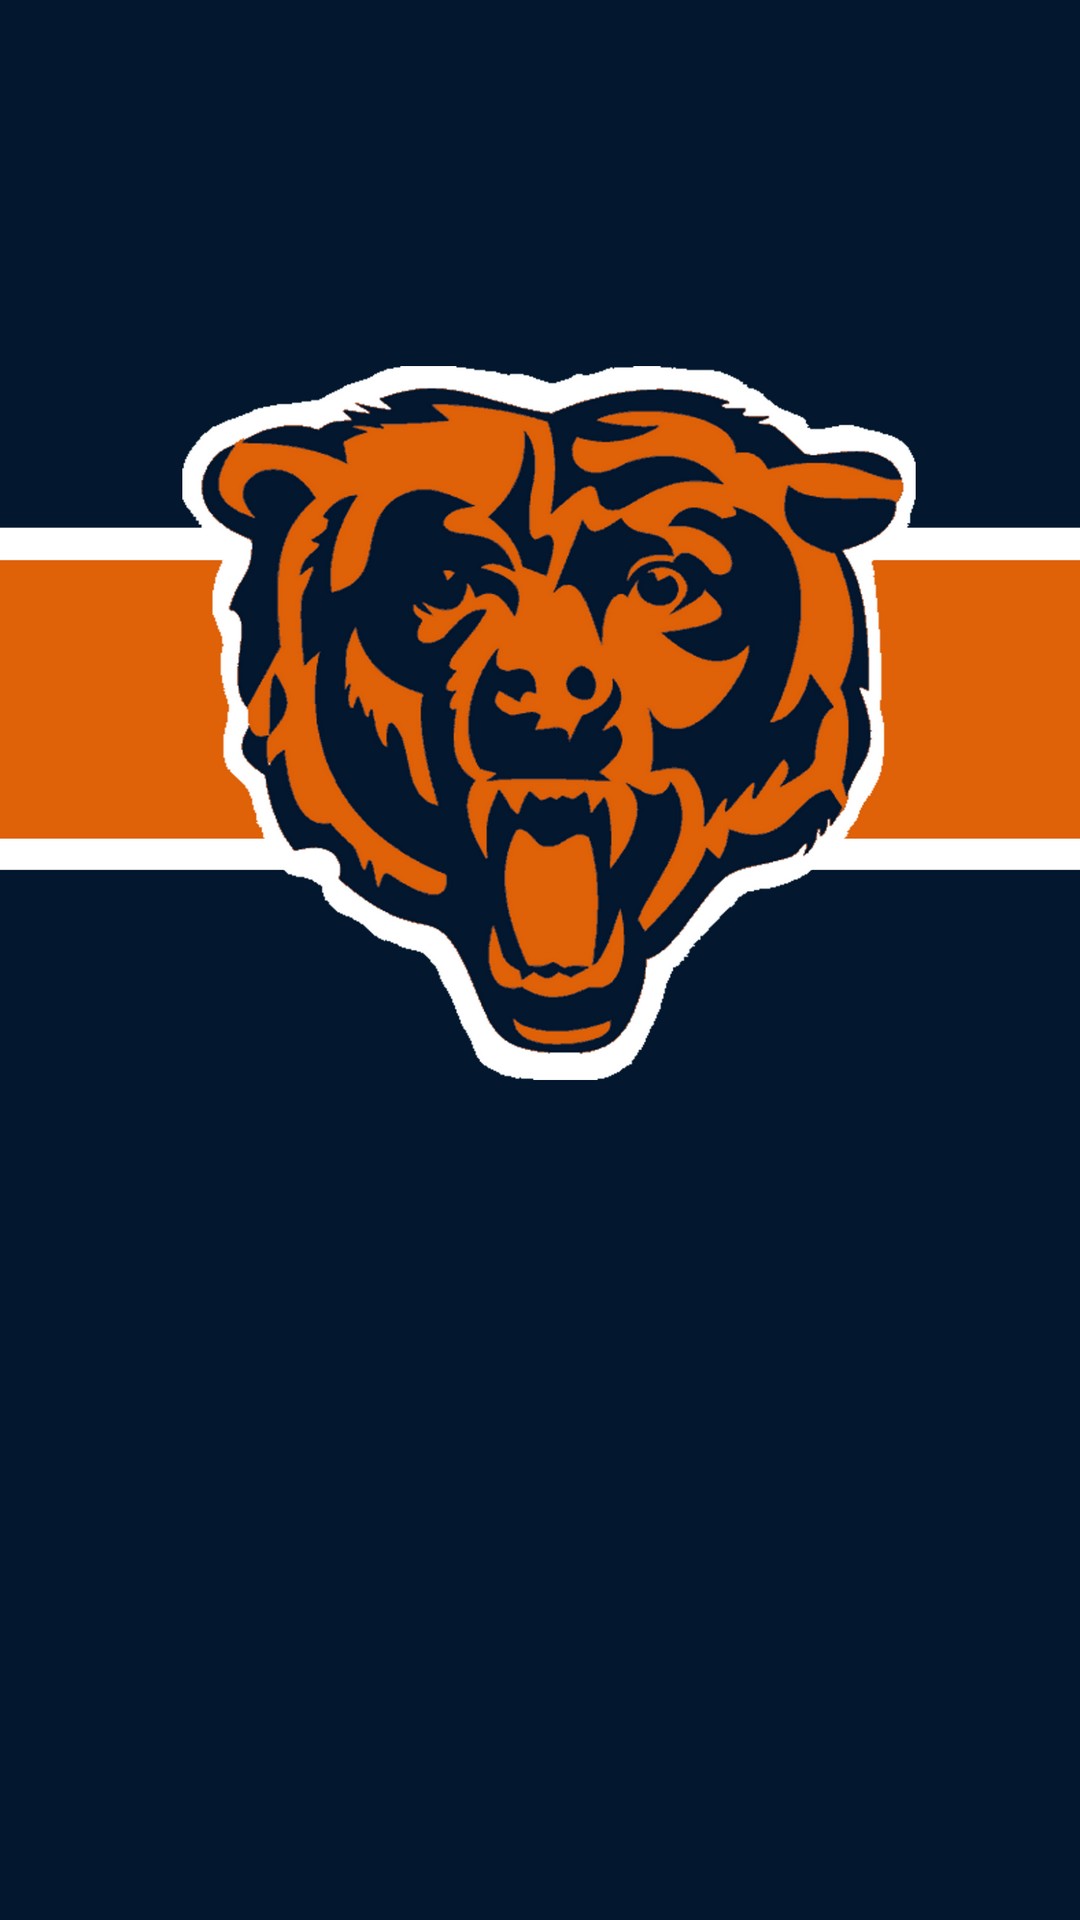 Chicago Bears iPhone XR Wallpaper with high-resolution 1080x1920 pixel. Download and set as wallpaper for Apple iPhone X, XS Max, XR, 8, 7, 6, SE, iPad, Android